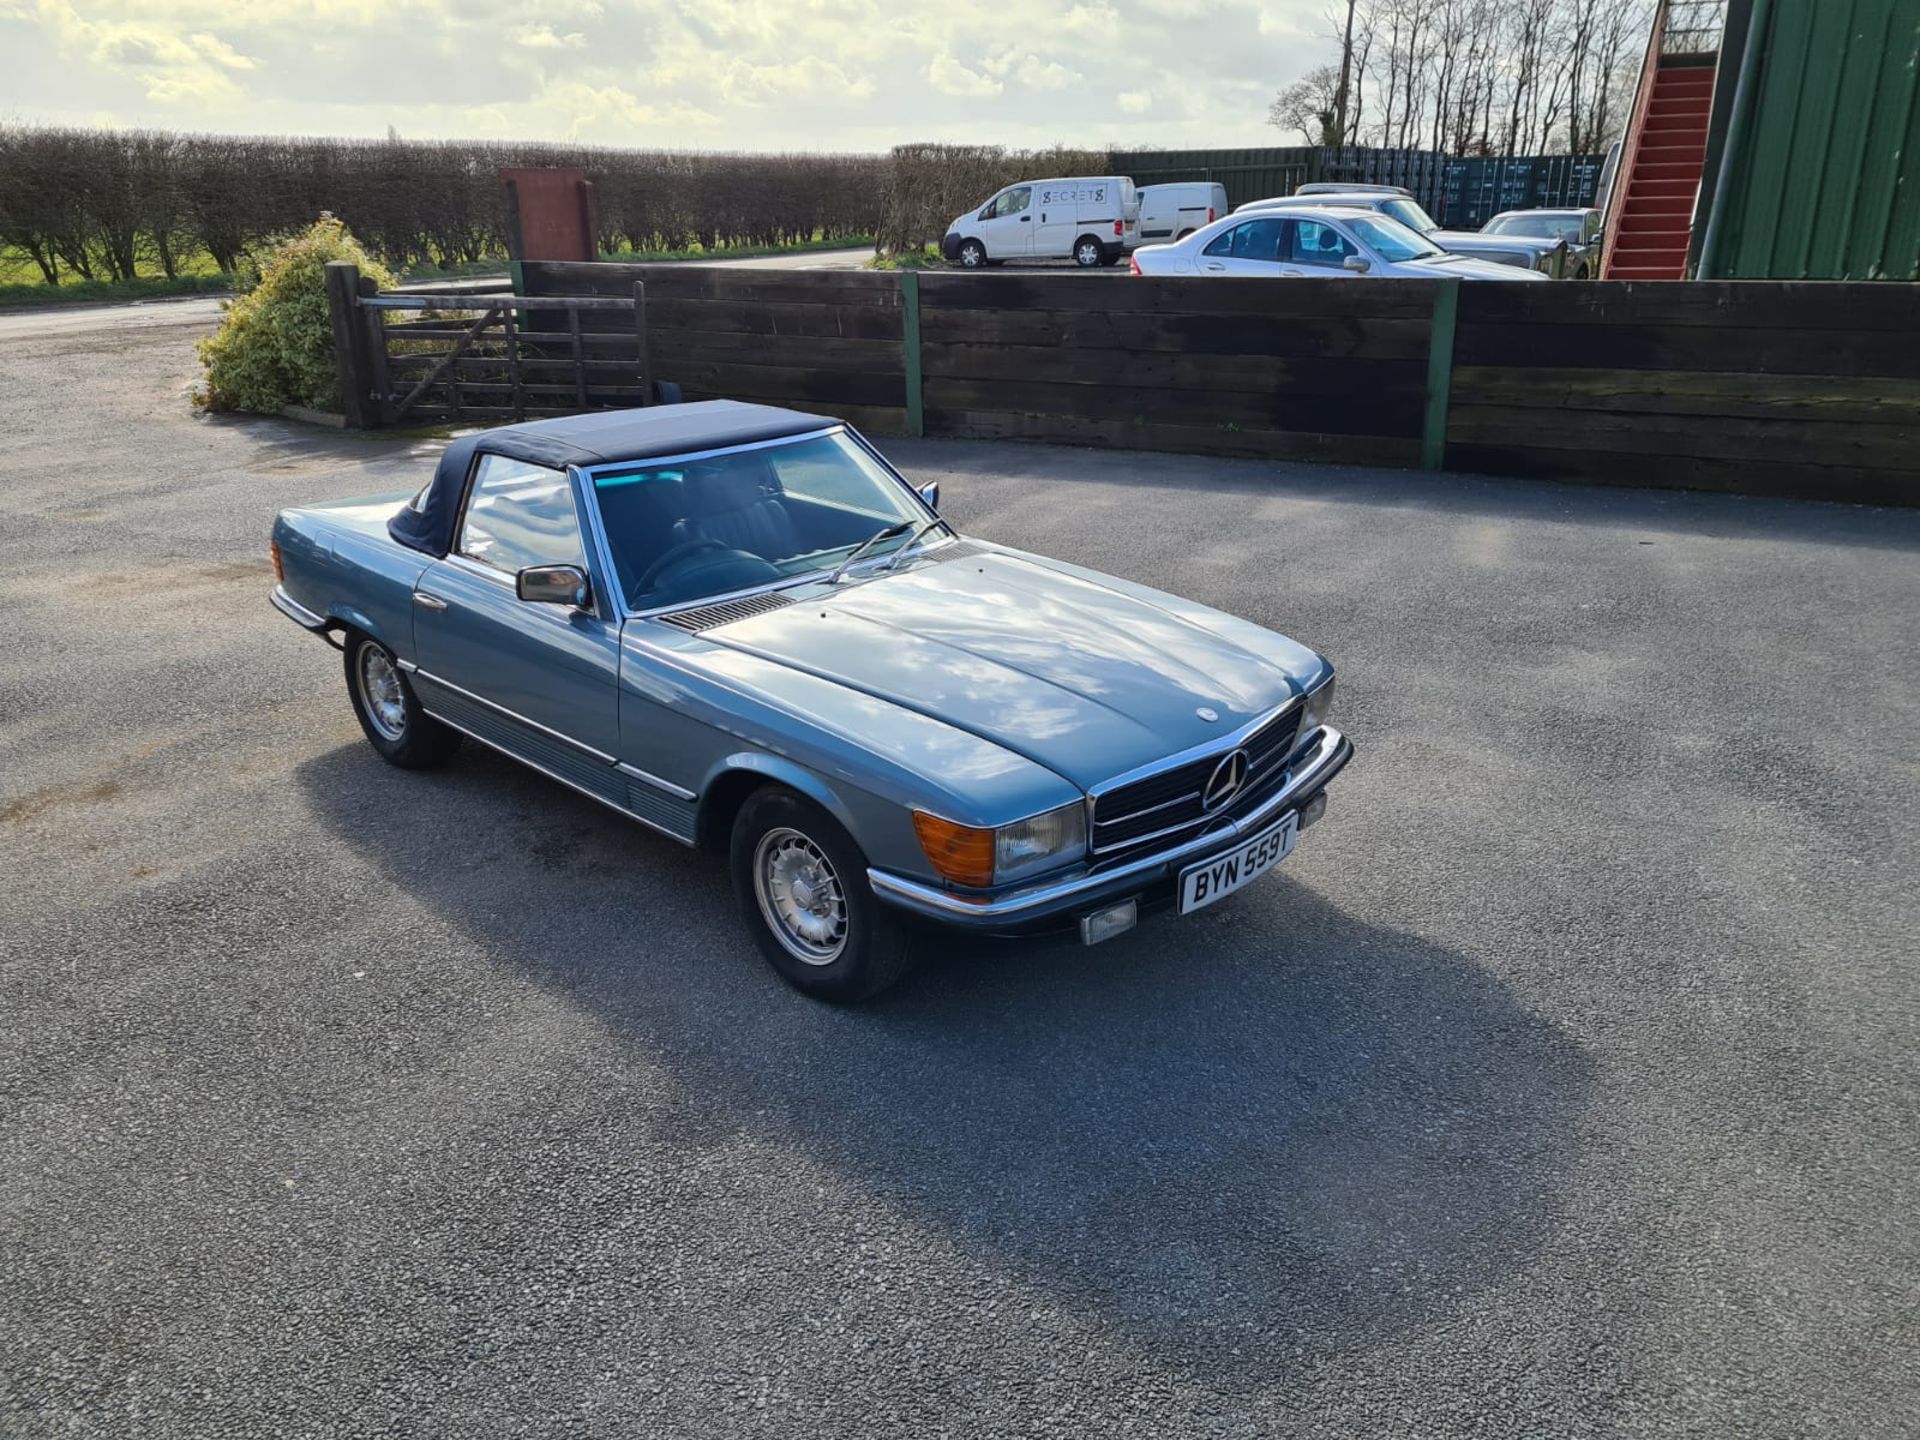 Stunning 1979 Mercedes Benz SL350 V8 With Factory Hardtop - Restored in 2018 - Image 21 of 22